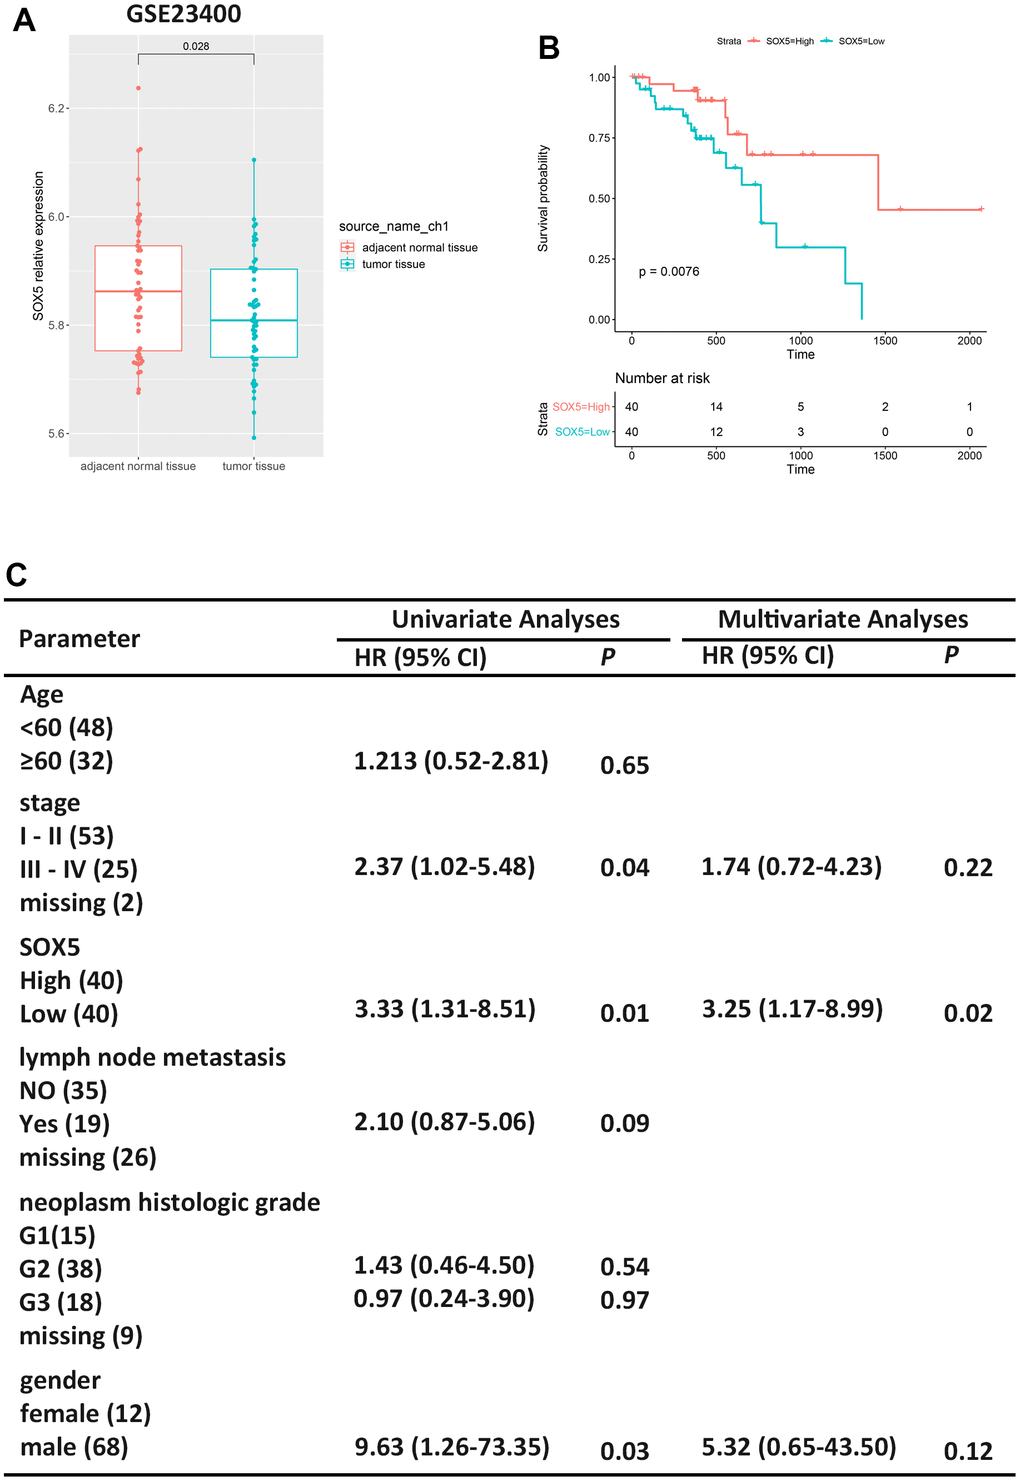 Low expression of SOX5 in ESCC is associated to survival. (A) Expression boxplots of SOX5 in ESCC tumor tissue and adjacent normal tissue from GSE23400. (B) Survival analysis of SOX5 in ESCC samples from TCGA-ESCC. (C) Univariate and multivariate cox regression analyses of clinicopathological characteristics for OS in ESCC samples from TCGA-ESCC. HR, hazard ratio; CI, confidence interval.